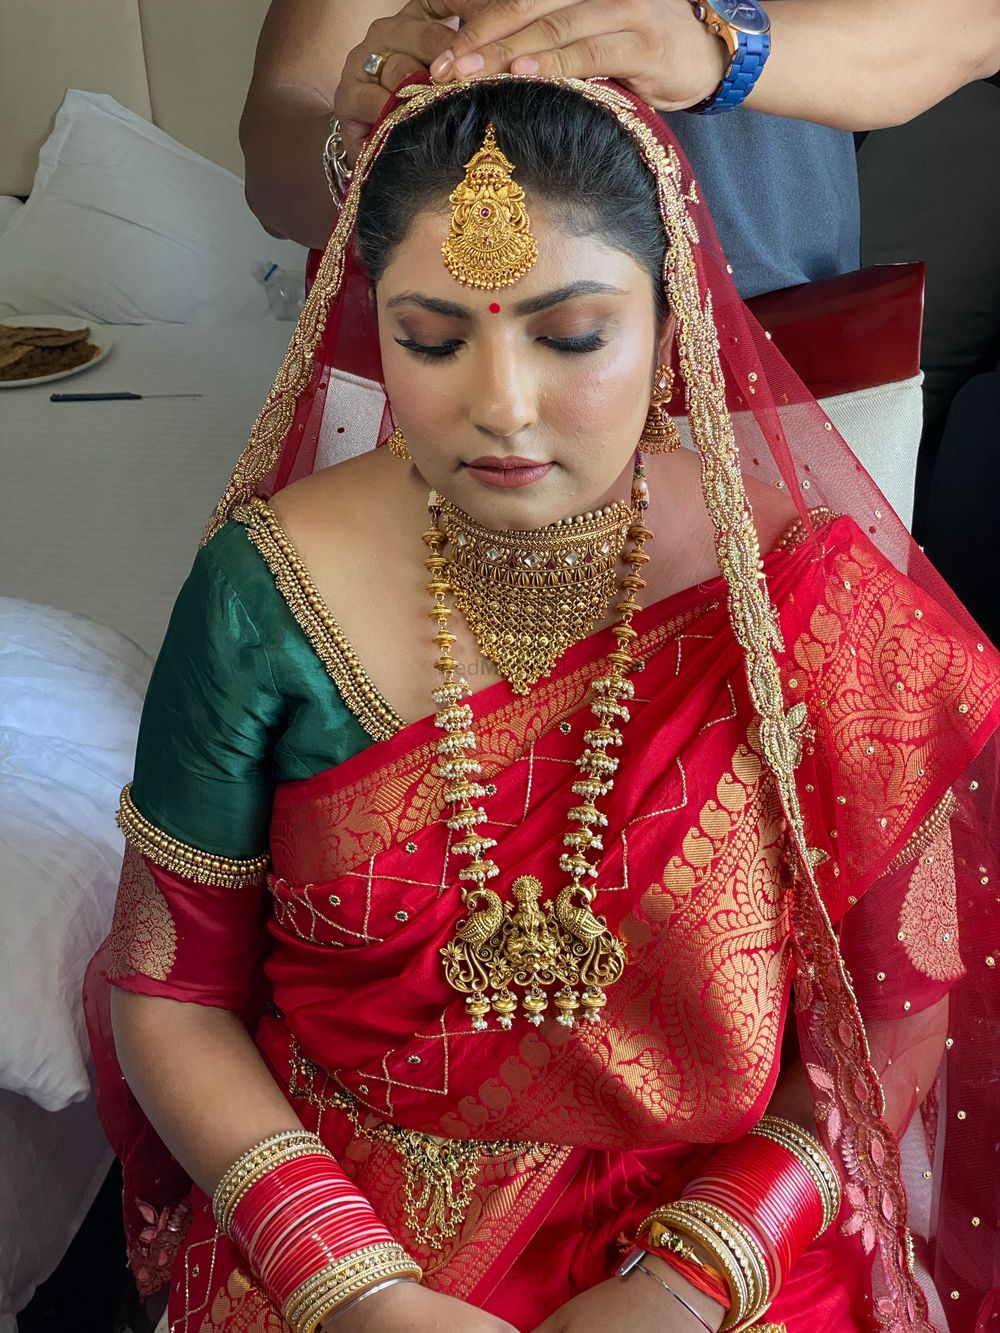 Photo By Makeover by Megha - Bridal Makeup